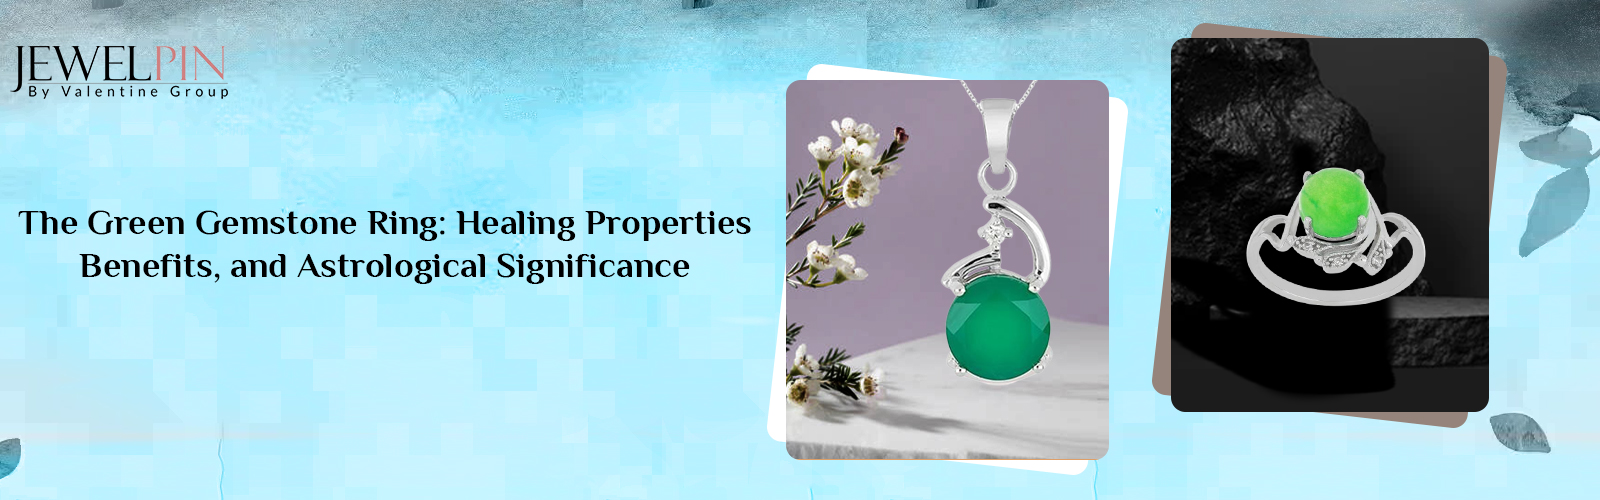 the green gemstone ring healing properties benefits and astrological significance